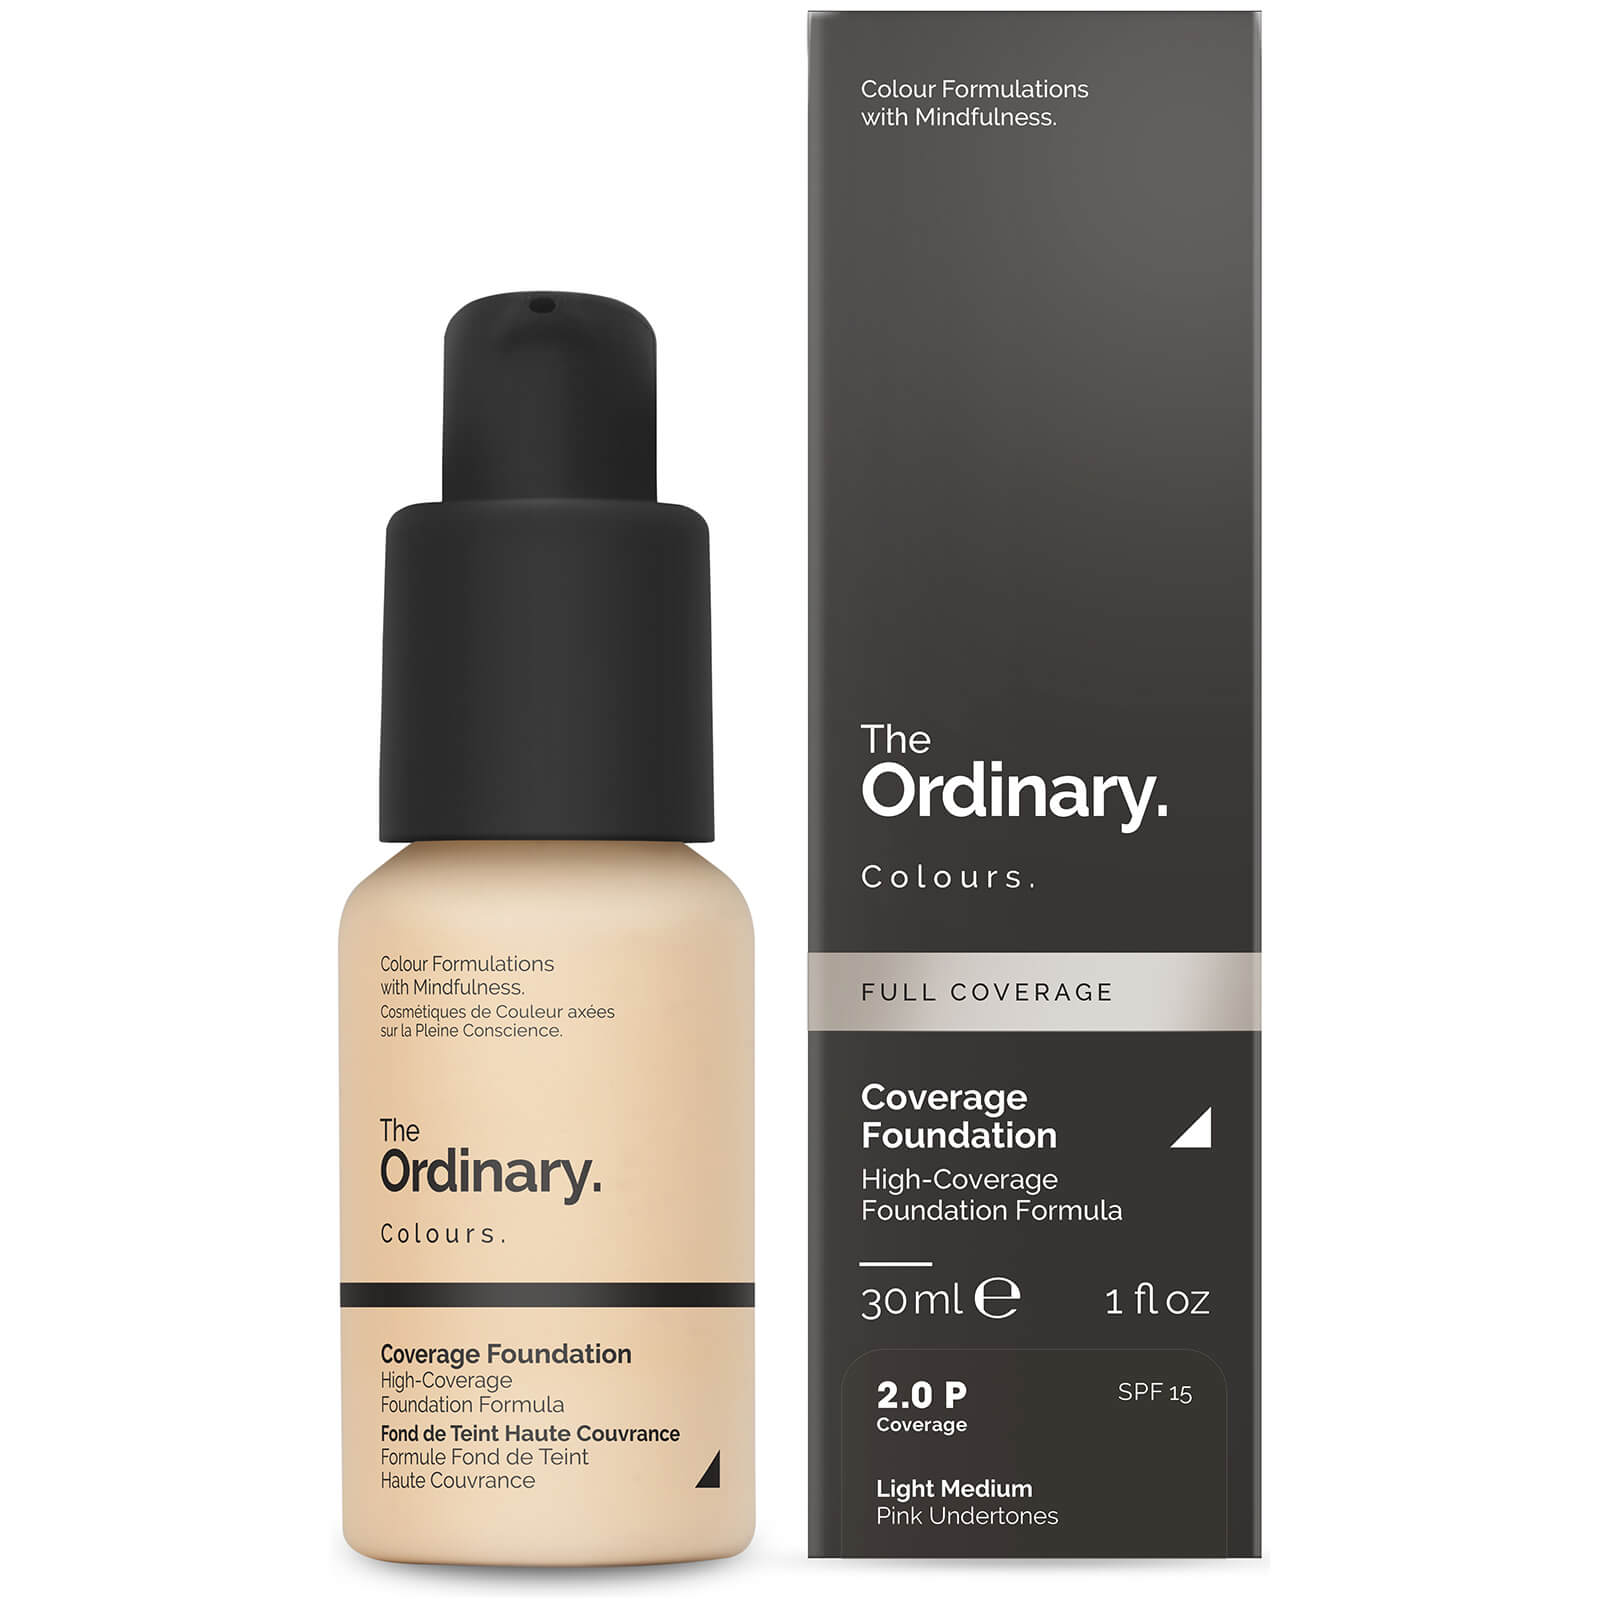 The Ordinary Coverage Foundation with SPF 15 by The Ordinary Colours 30ml (Various Shades) - 2.0P